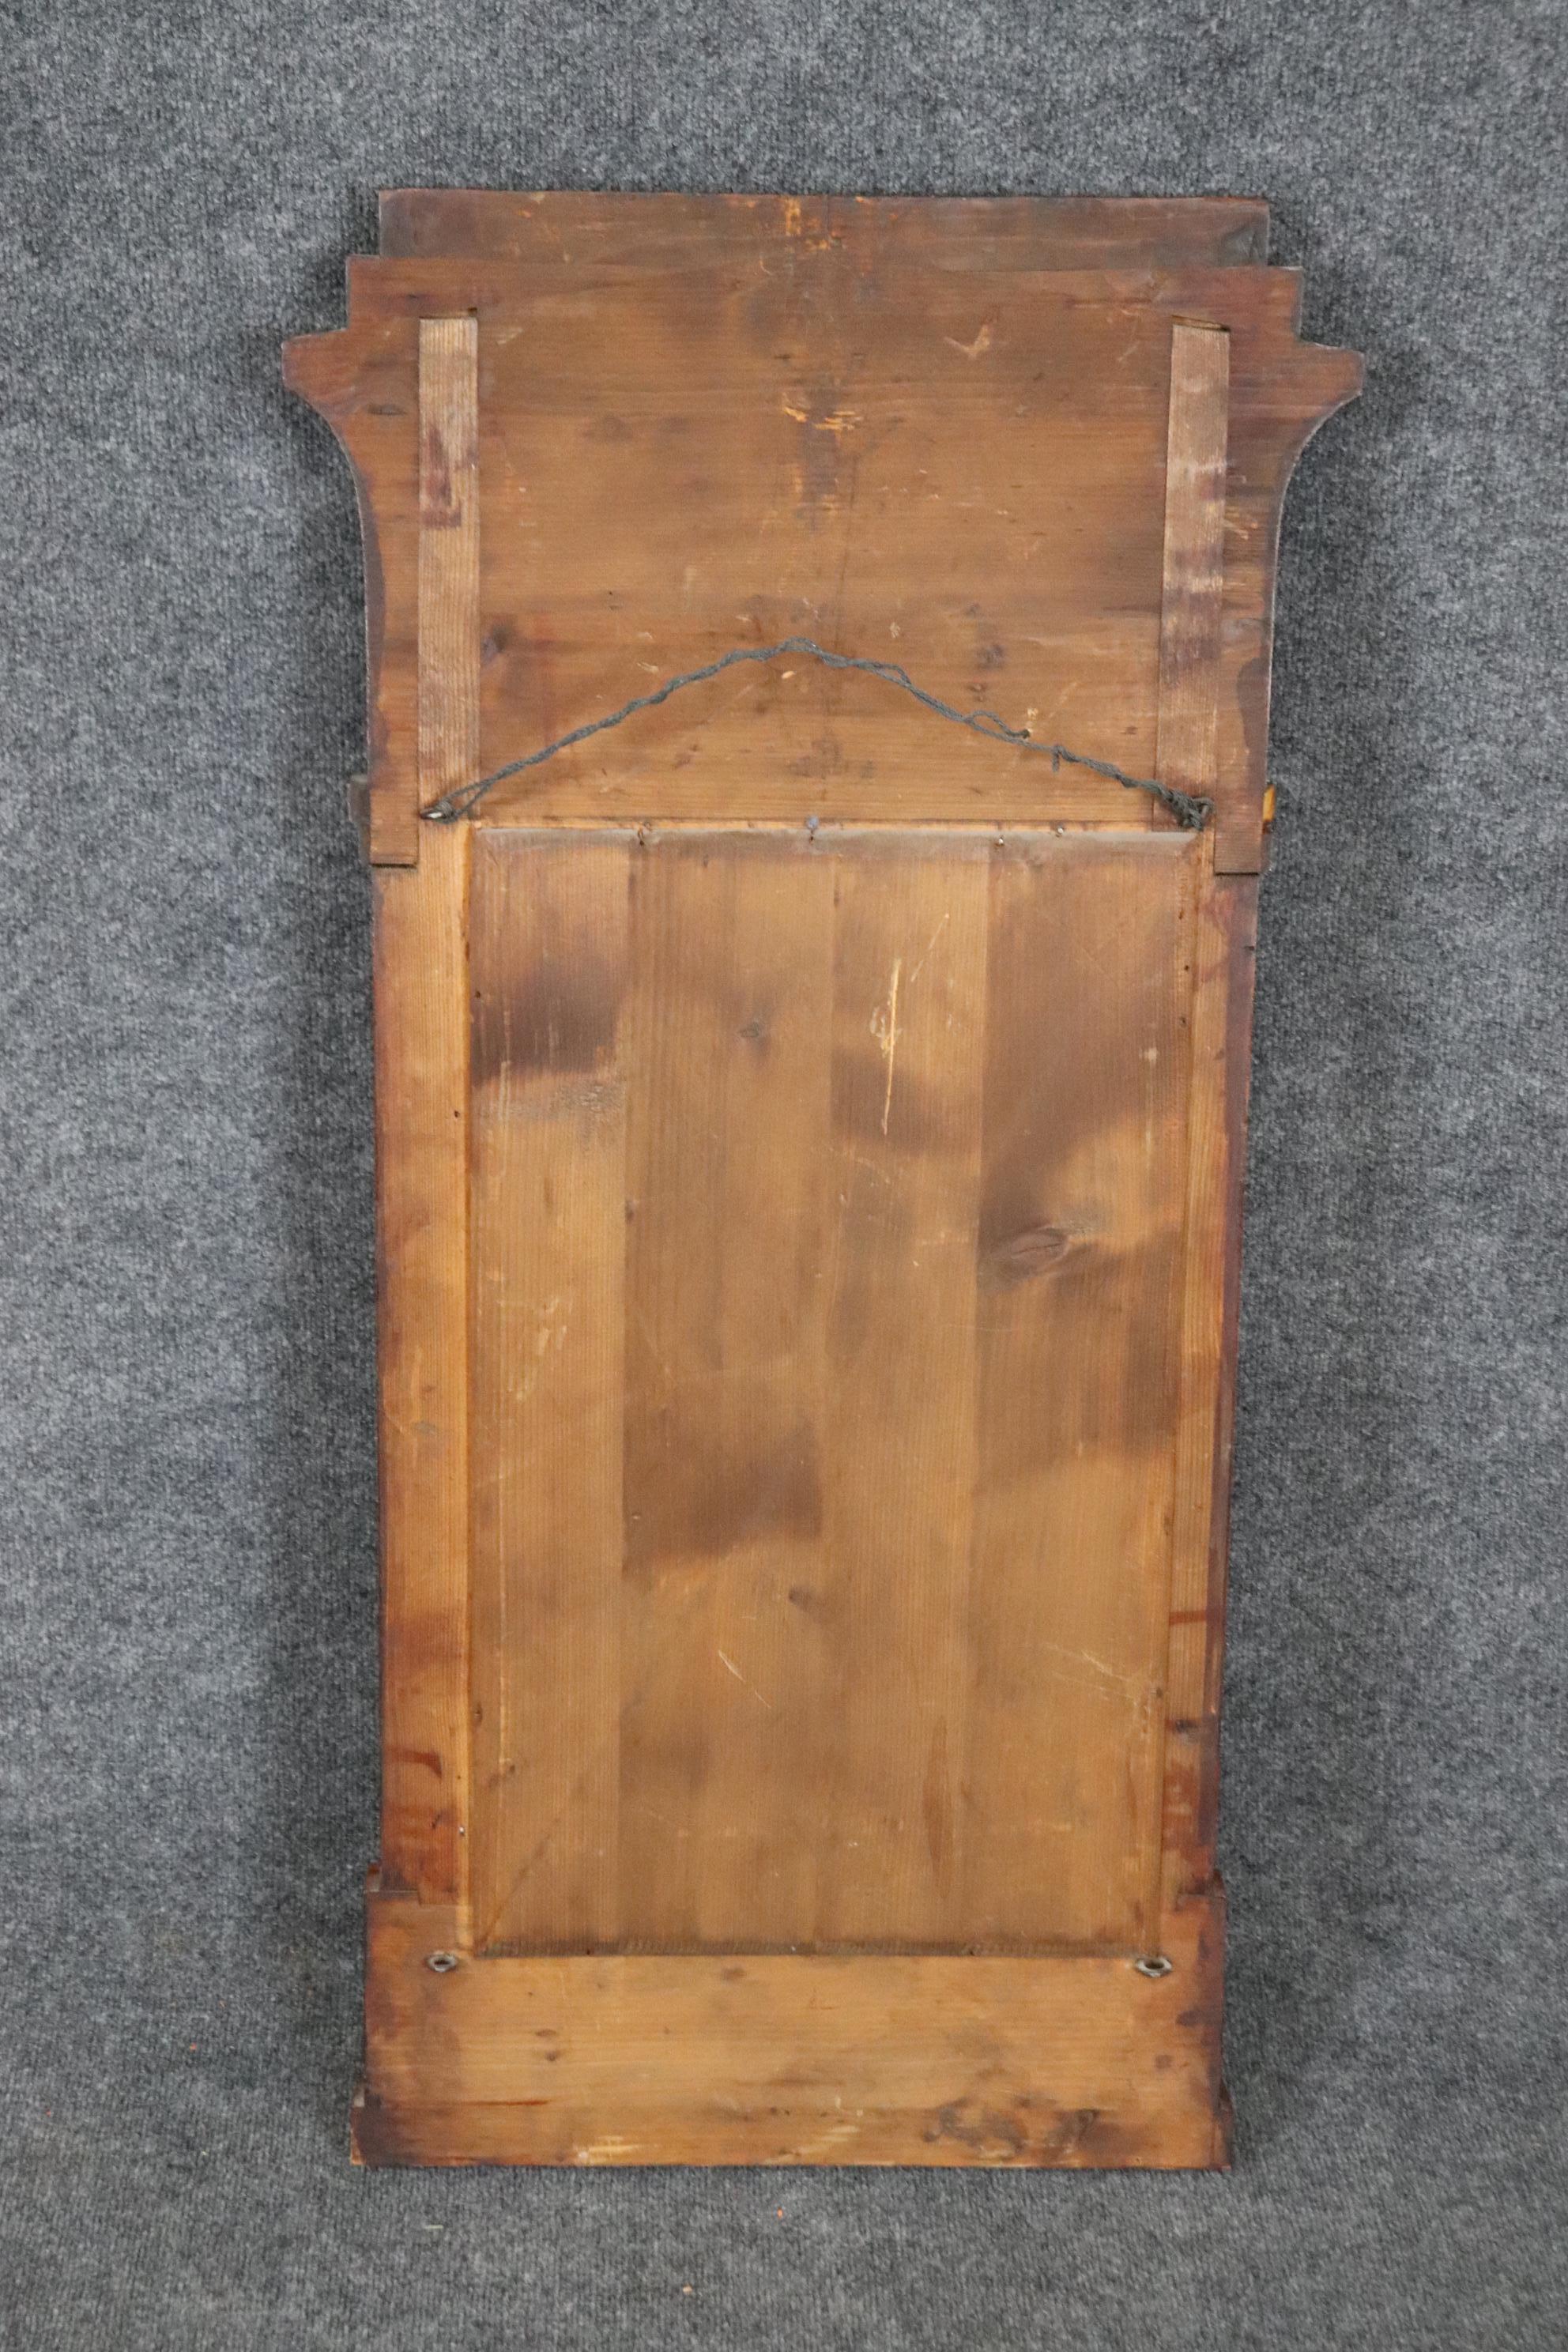 This is a dazzling antique original mirror that is made of gorgeous ash wood and elaborately figured in beautiful wavy grain and in good condition with a beautiful mirror plate mirror. The mirror Measures 43 tall x 22 wide x 2.75 deep and dates to